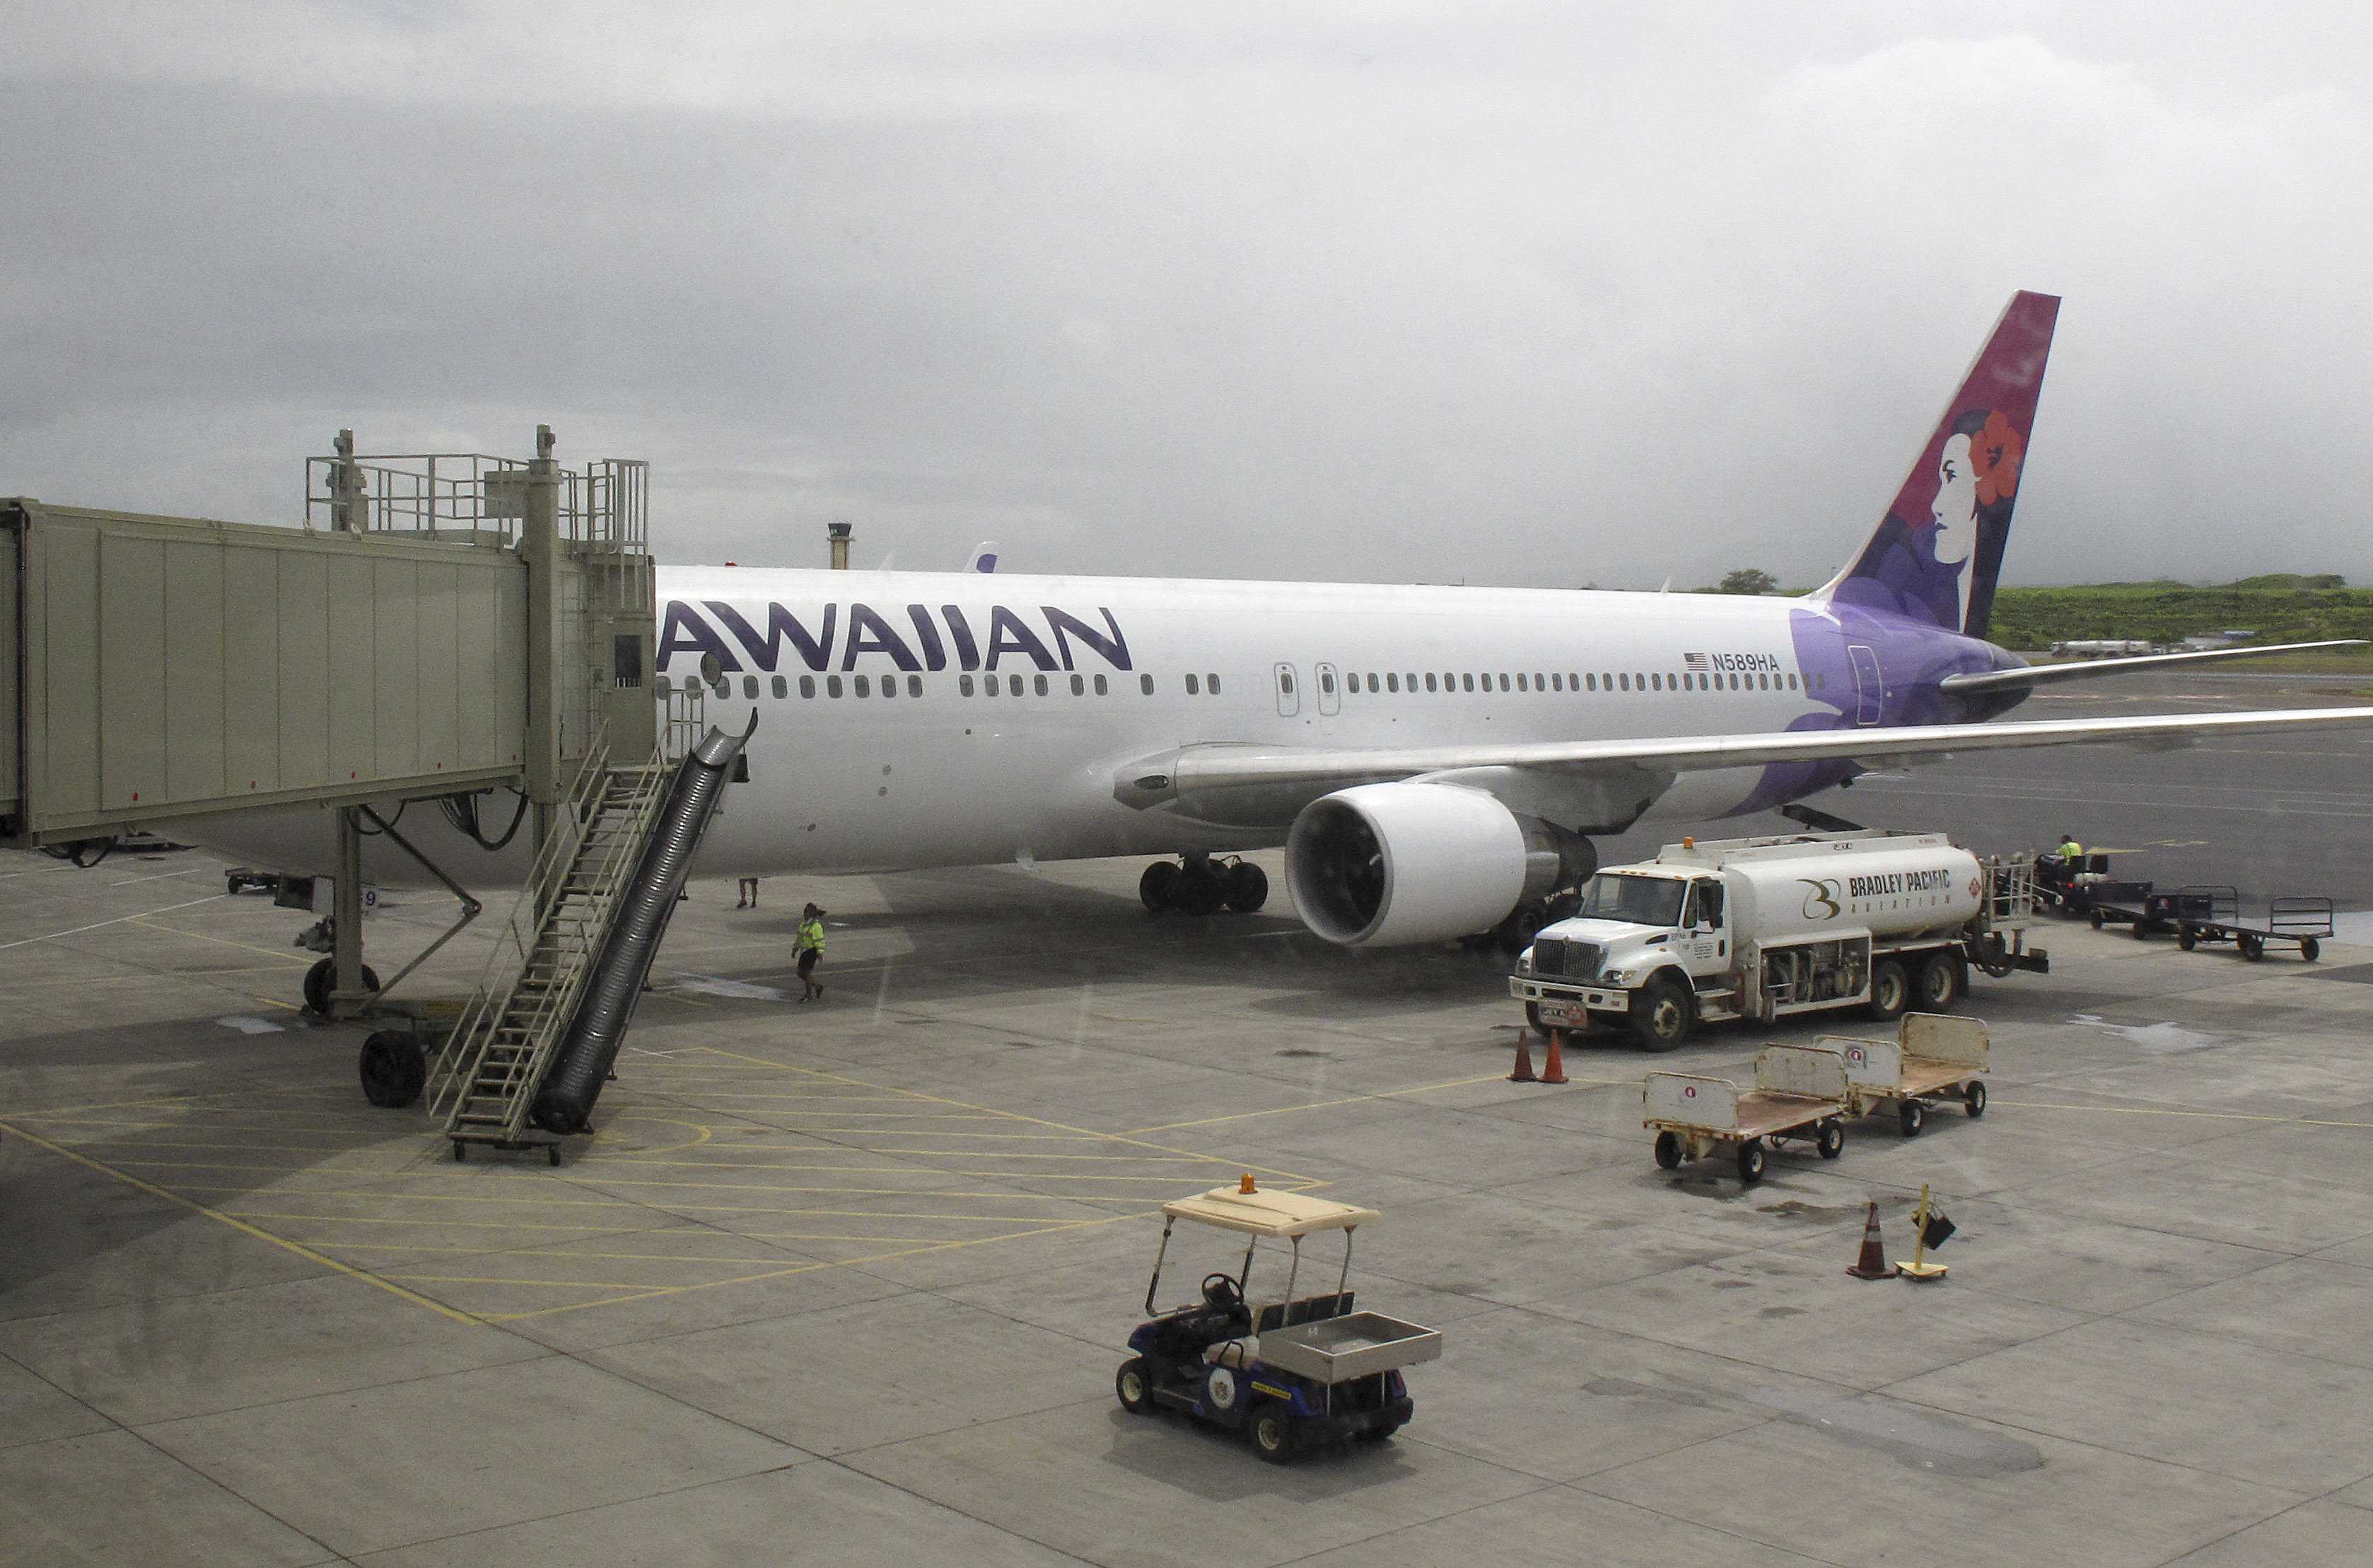 Wanna get far away? Boston adds nonstop service to Hawaii